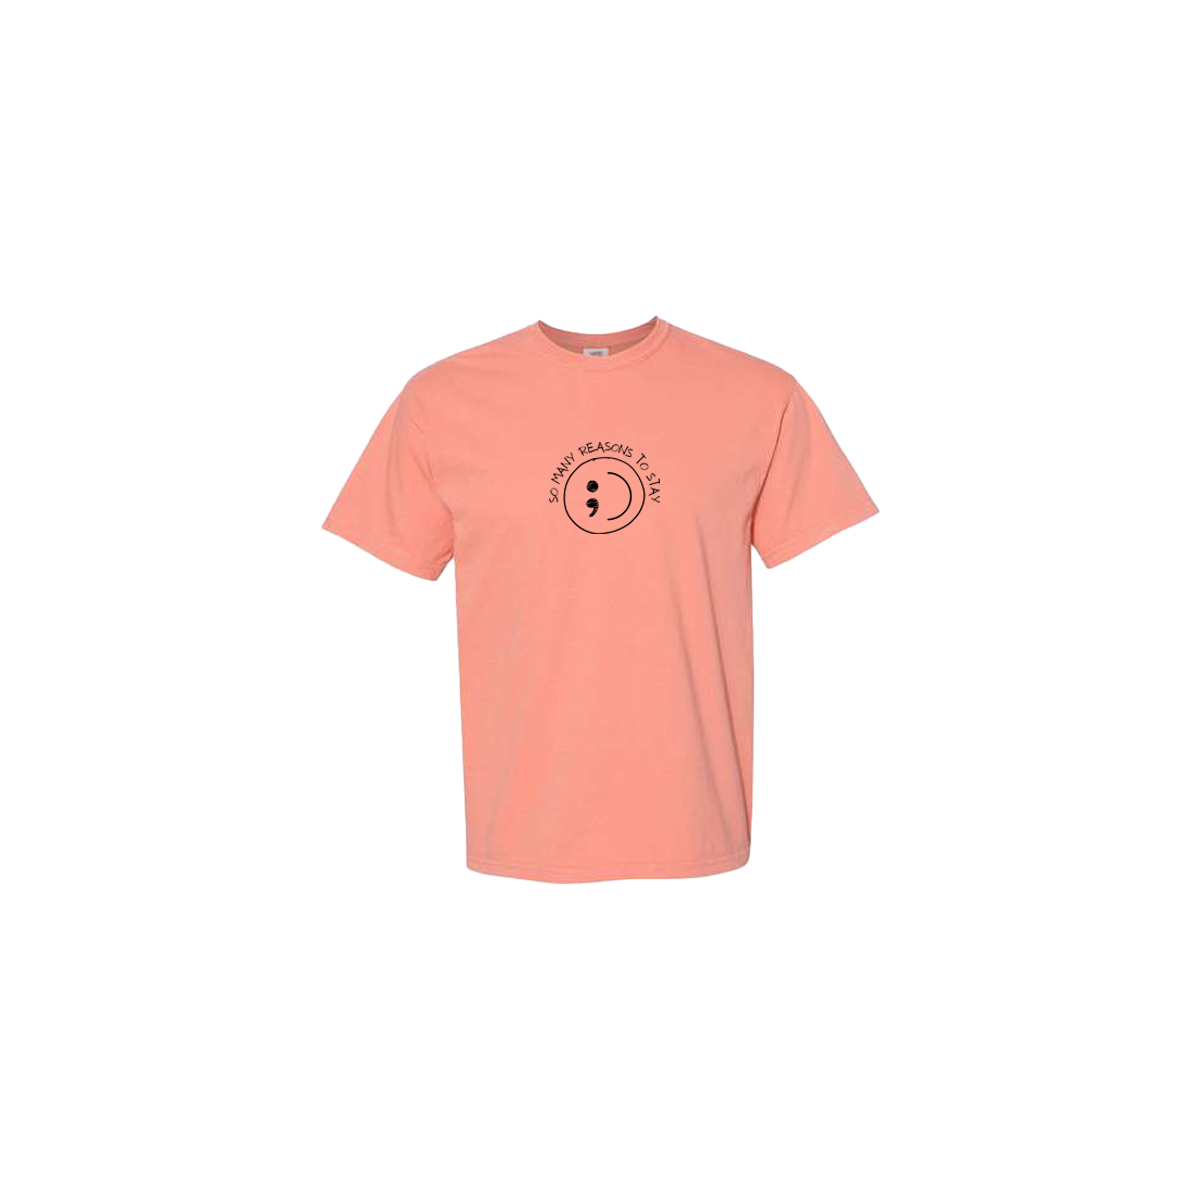 So Many Reasons to Stay Embroidered Coral Tshirt - Mental Health Awareness Clothing